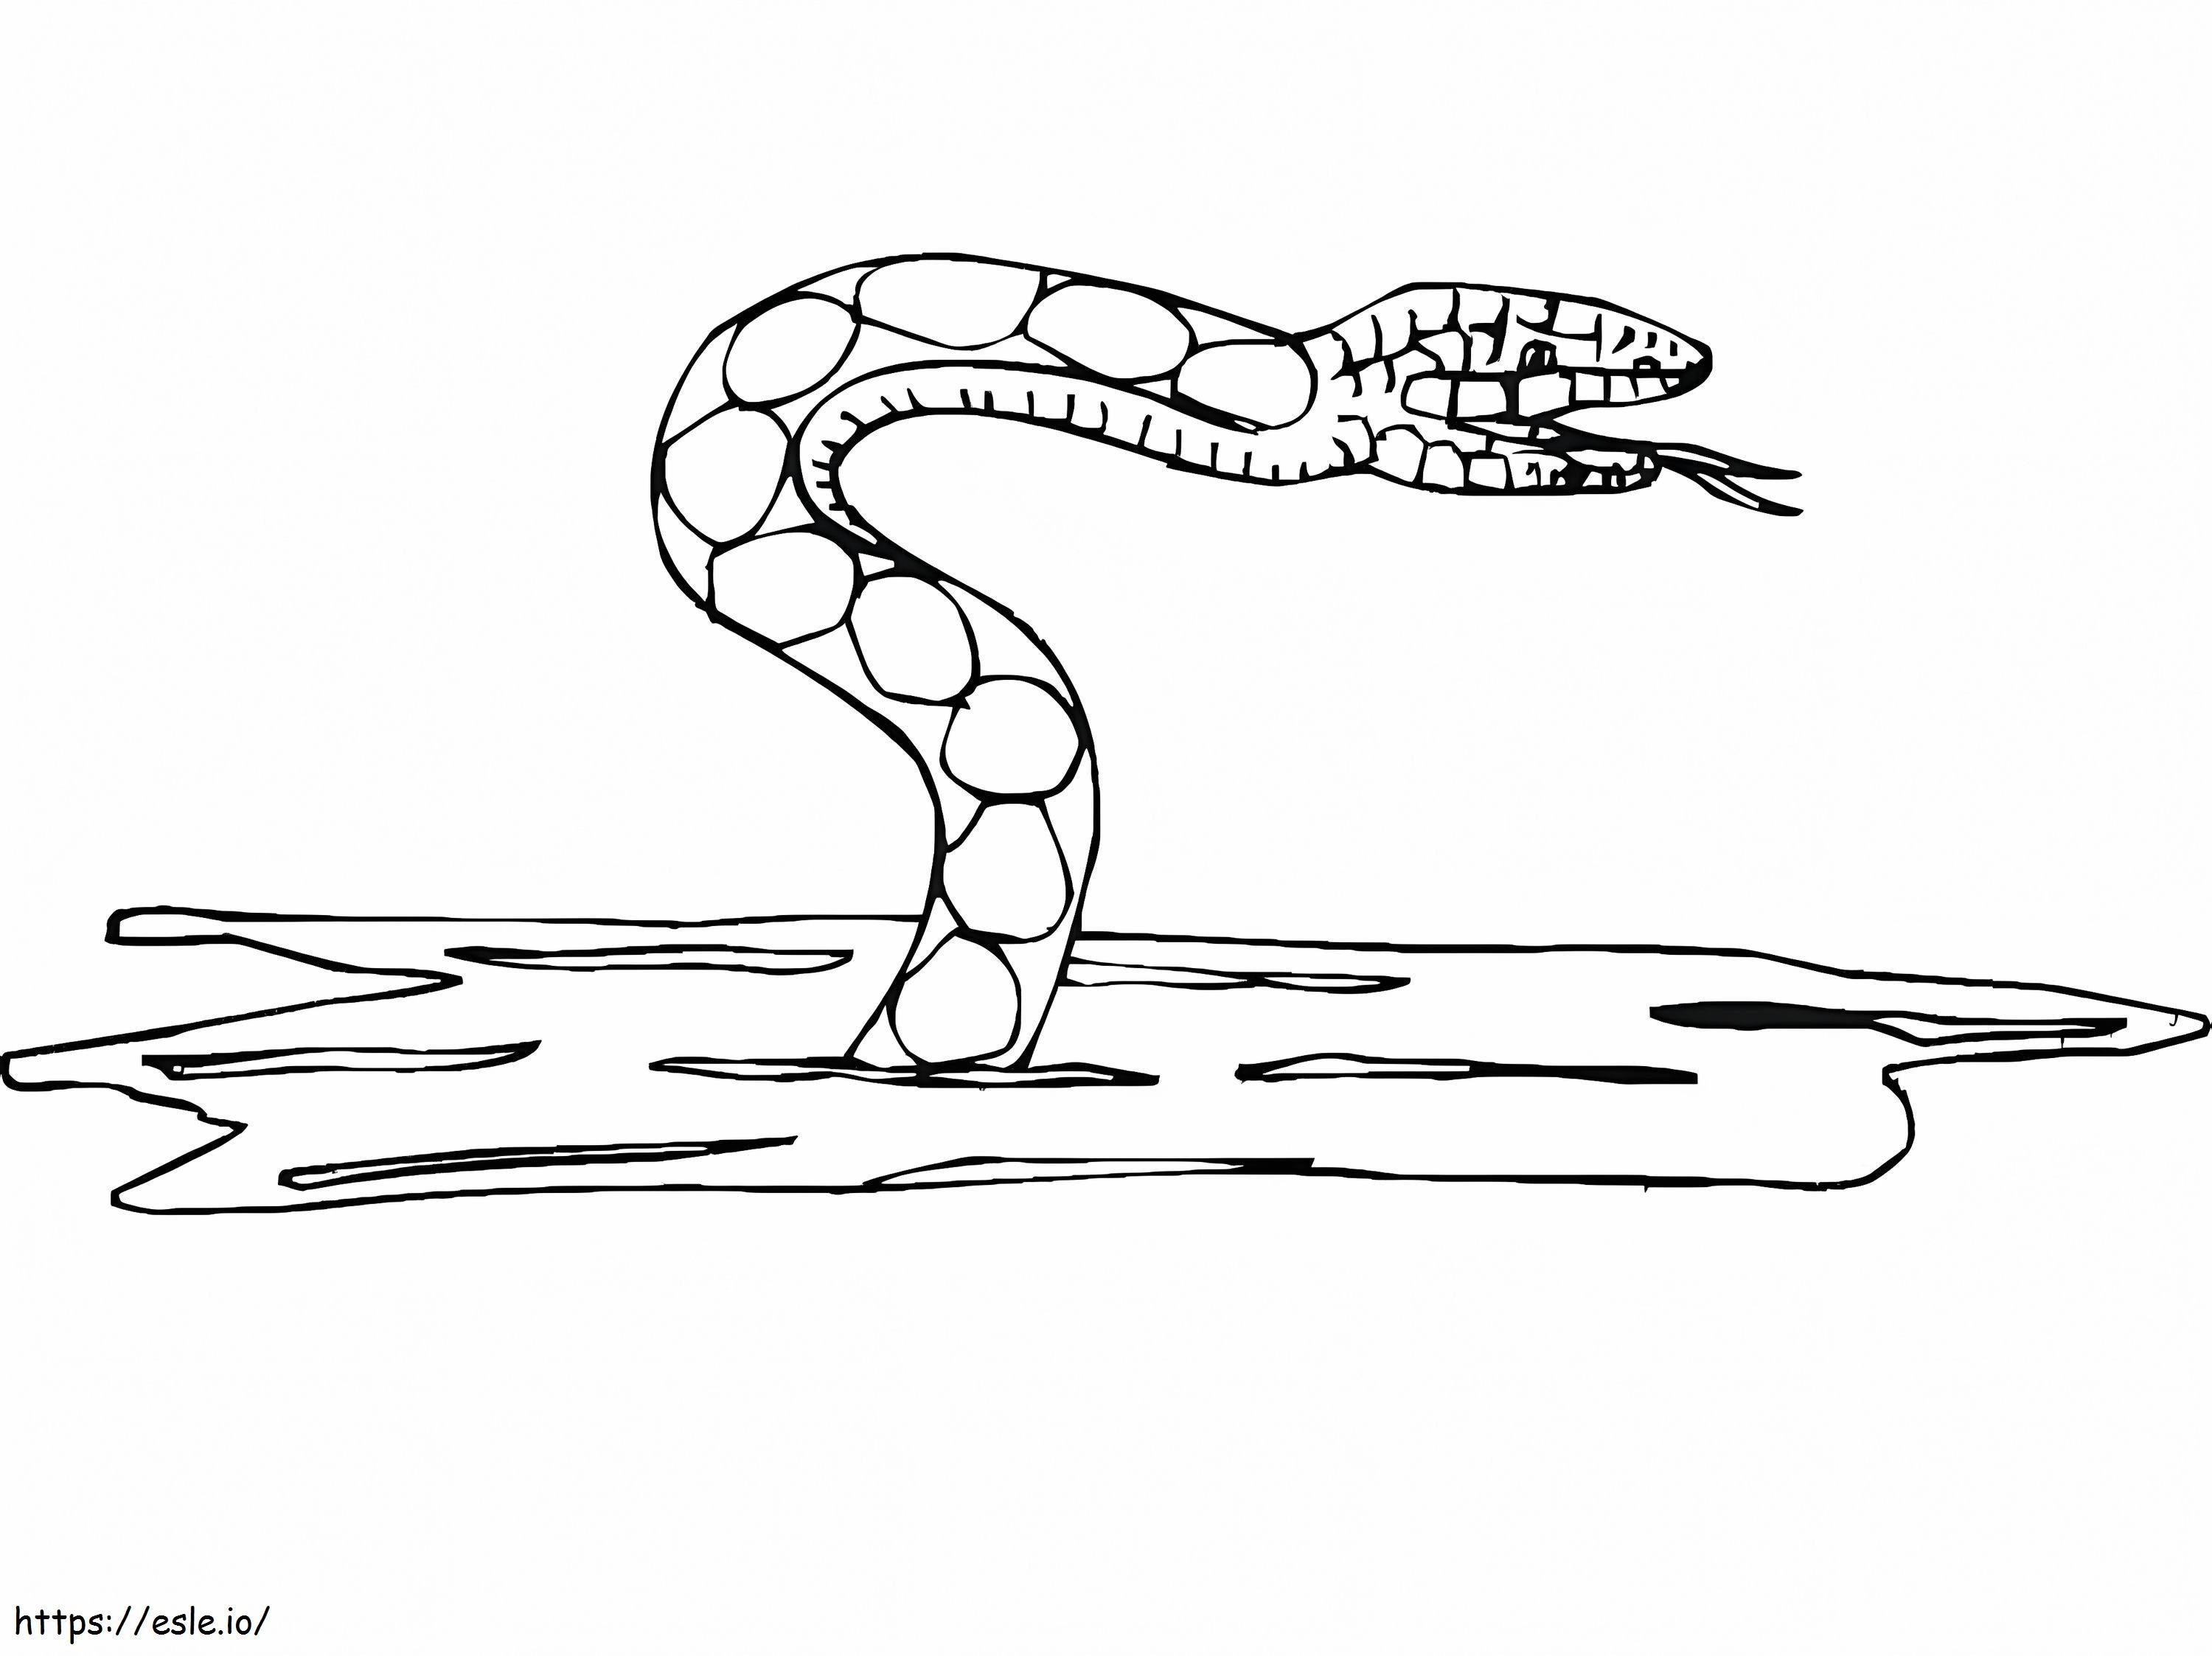 Water Snake coloring page